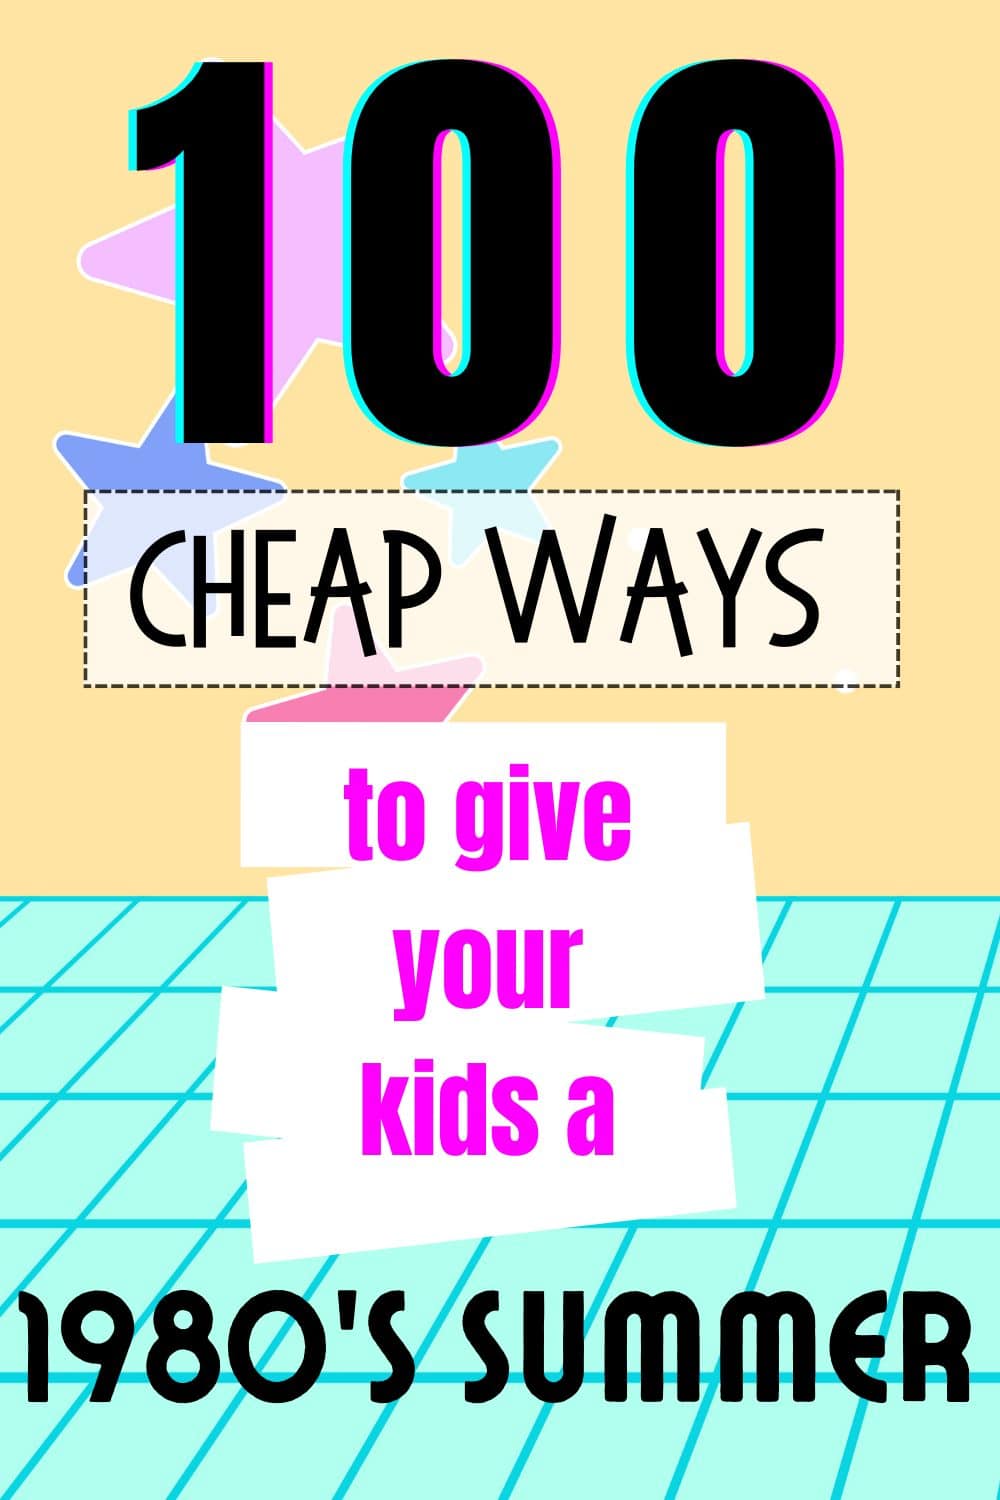 Cheap ways to give your kids a 1980s summer